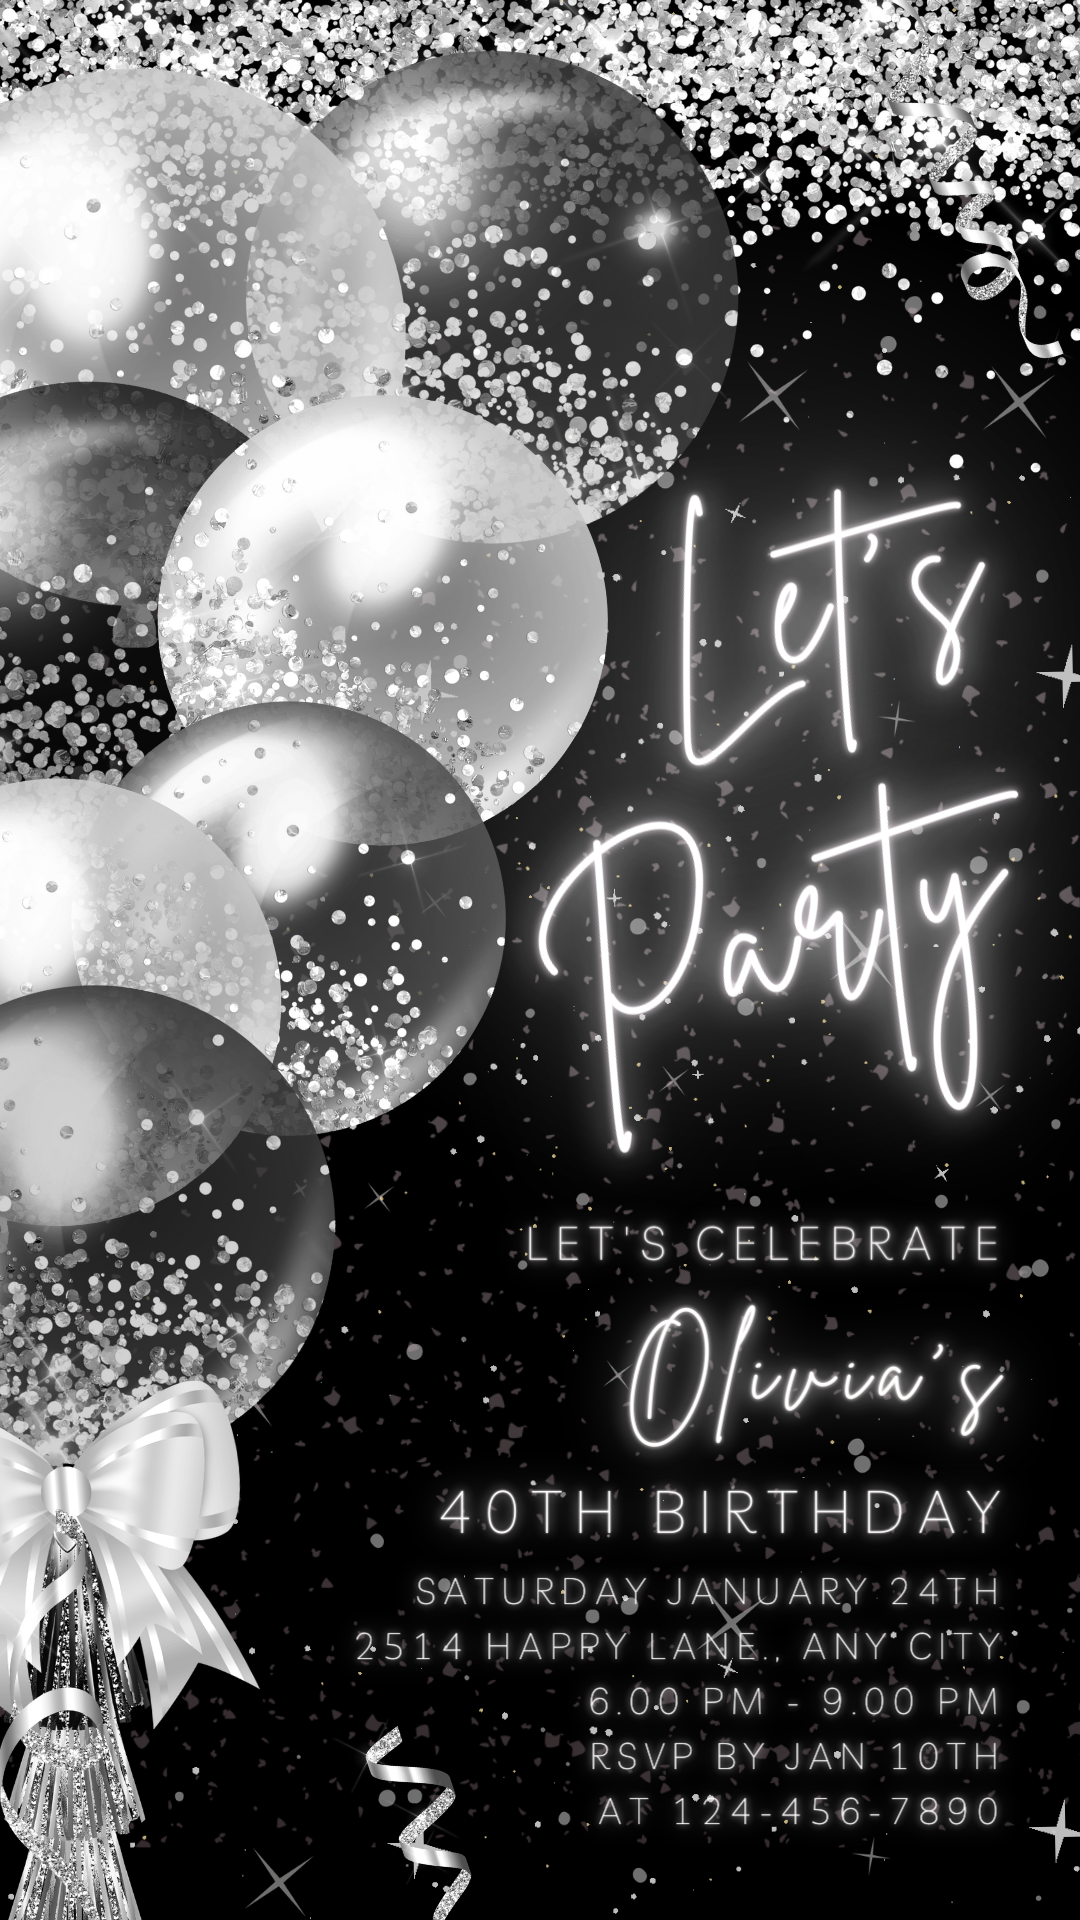 Animated Let's Party Invite for any Event Celebration, Editable Video Template, Birthday invitation for any Age | Black & Silver E-vite